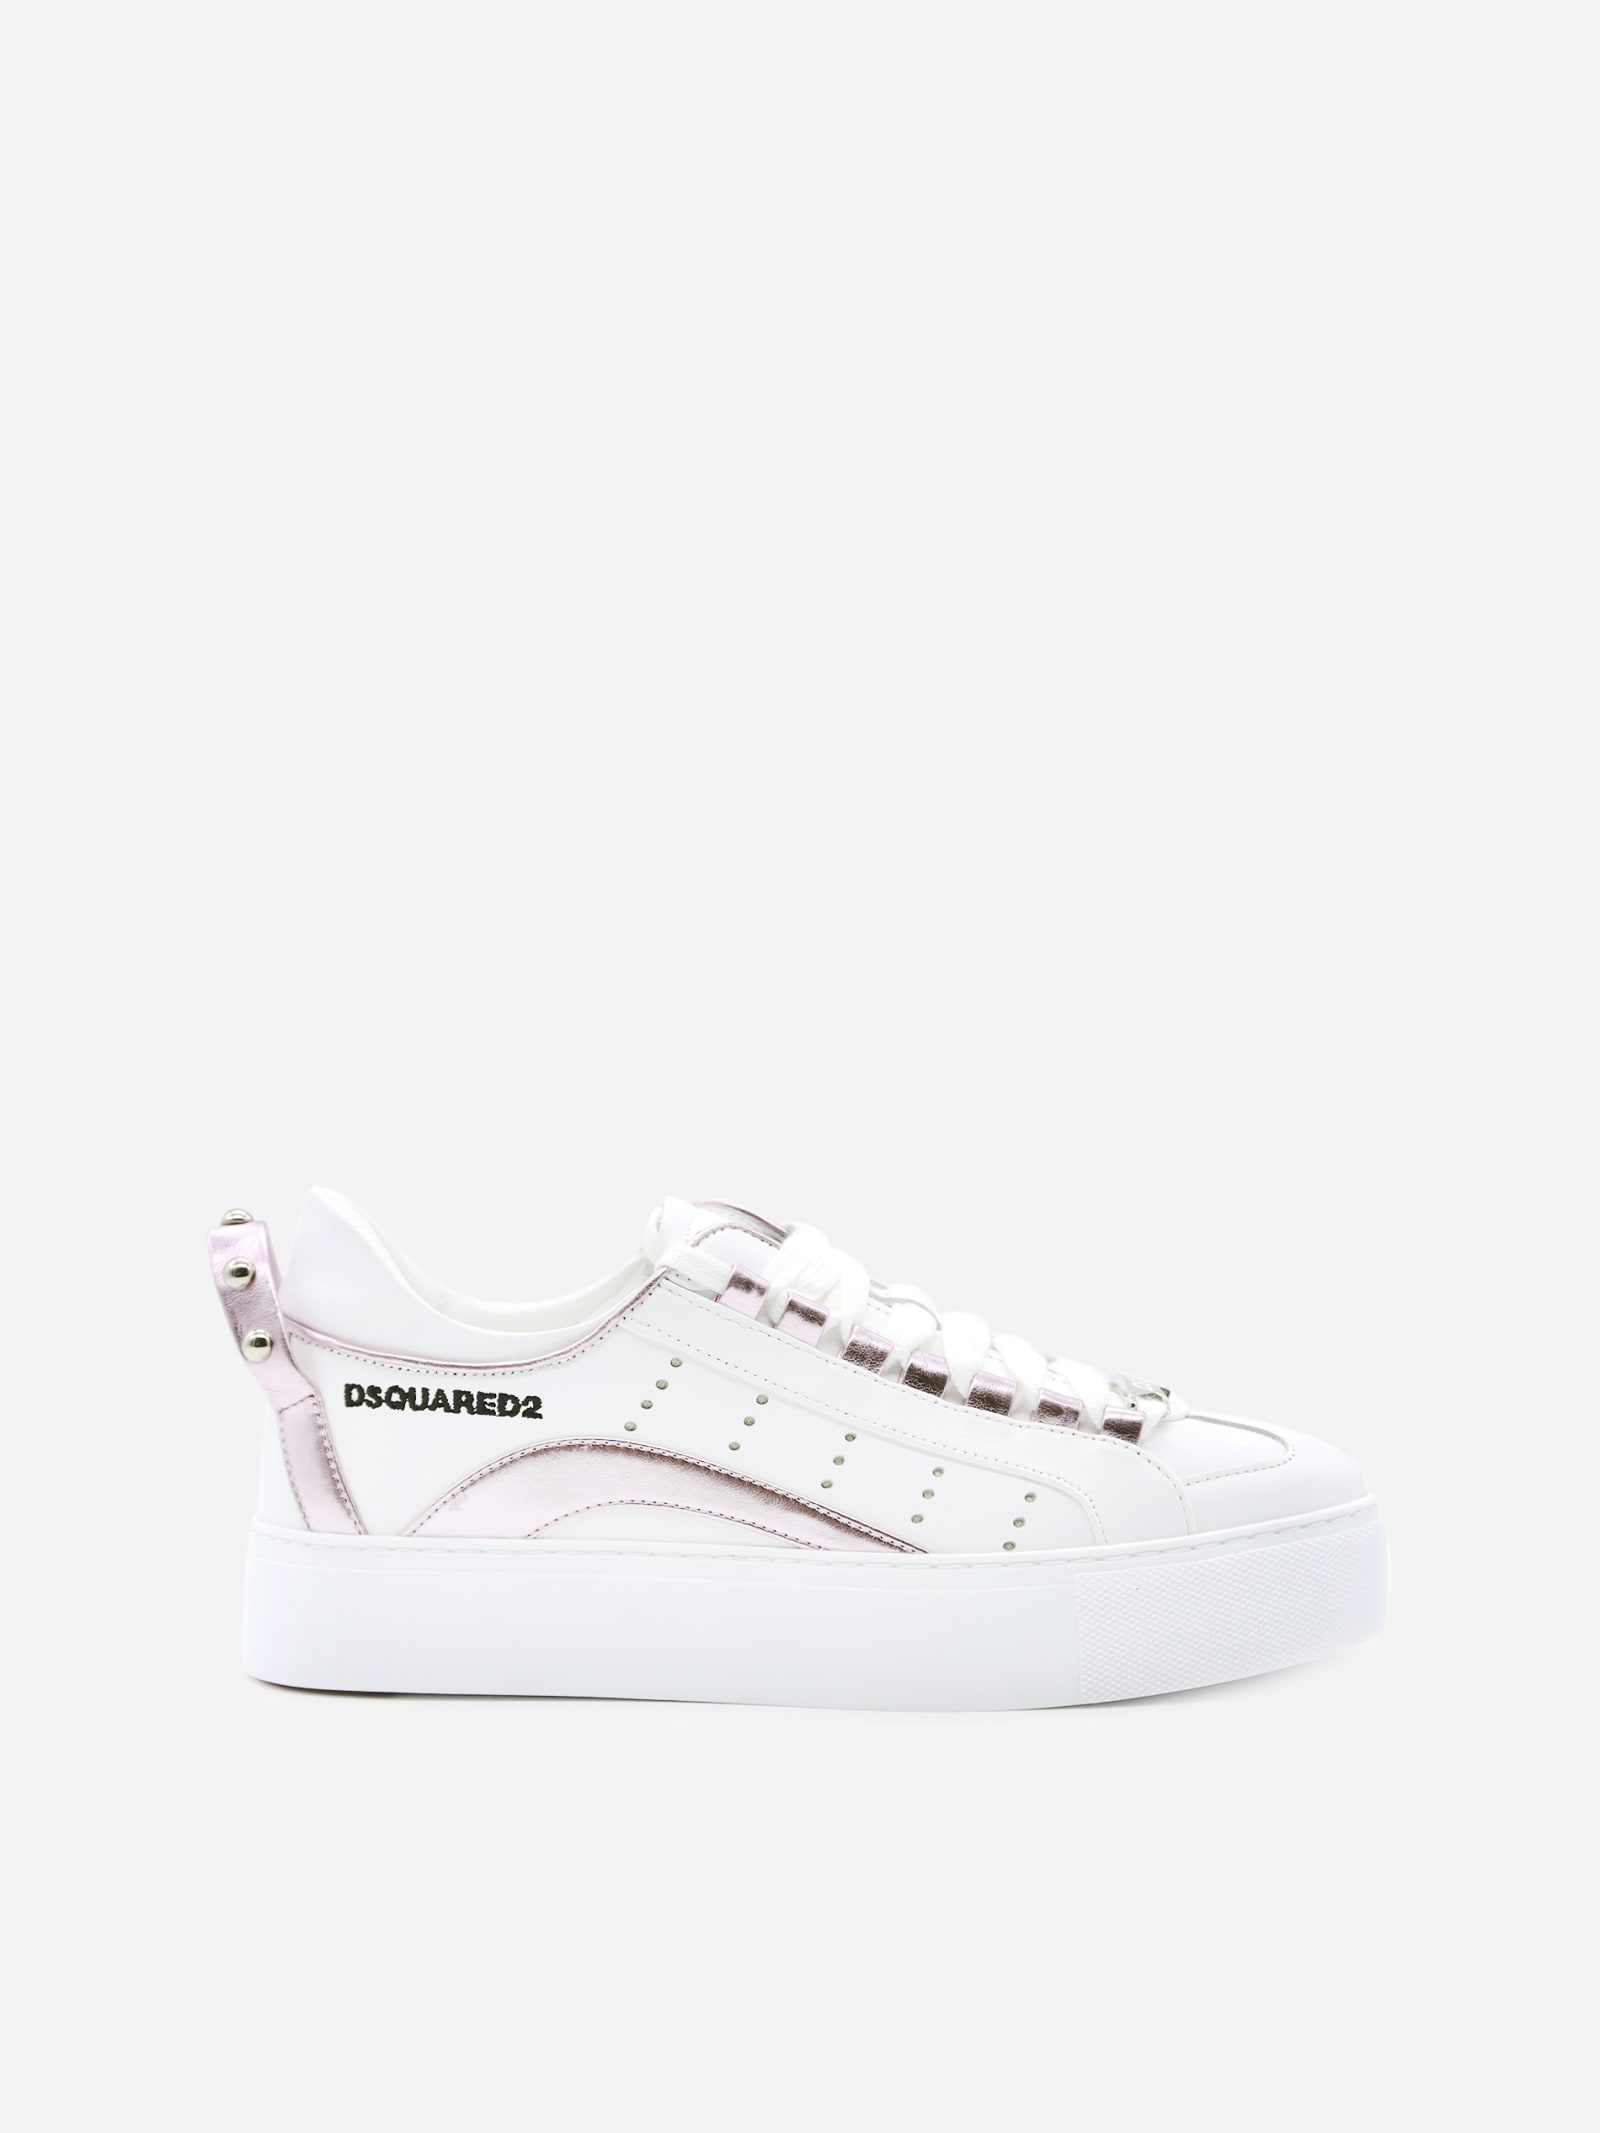 Dsquared2 551 Sneakers In Metallic Effect Leather With Studs Detail